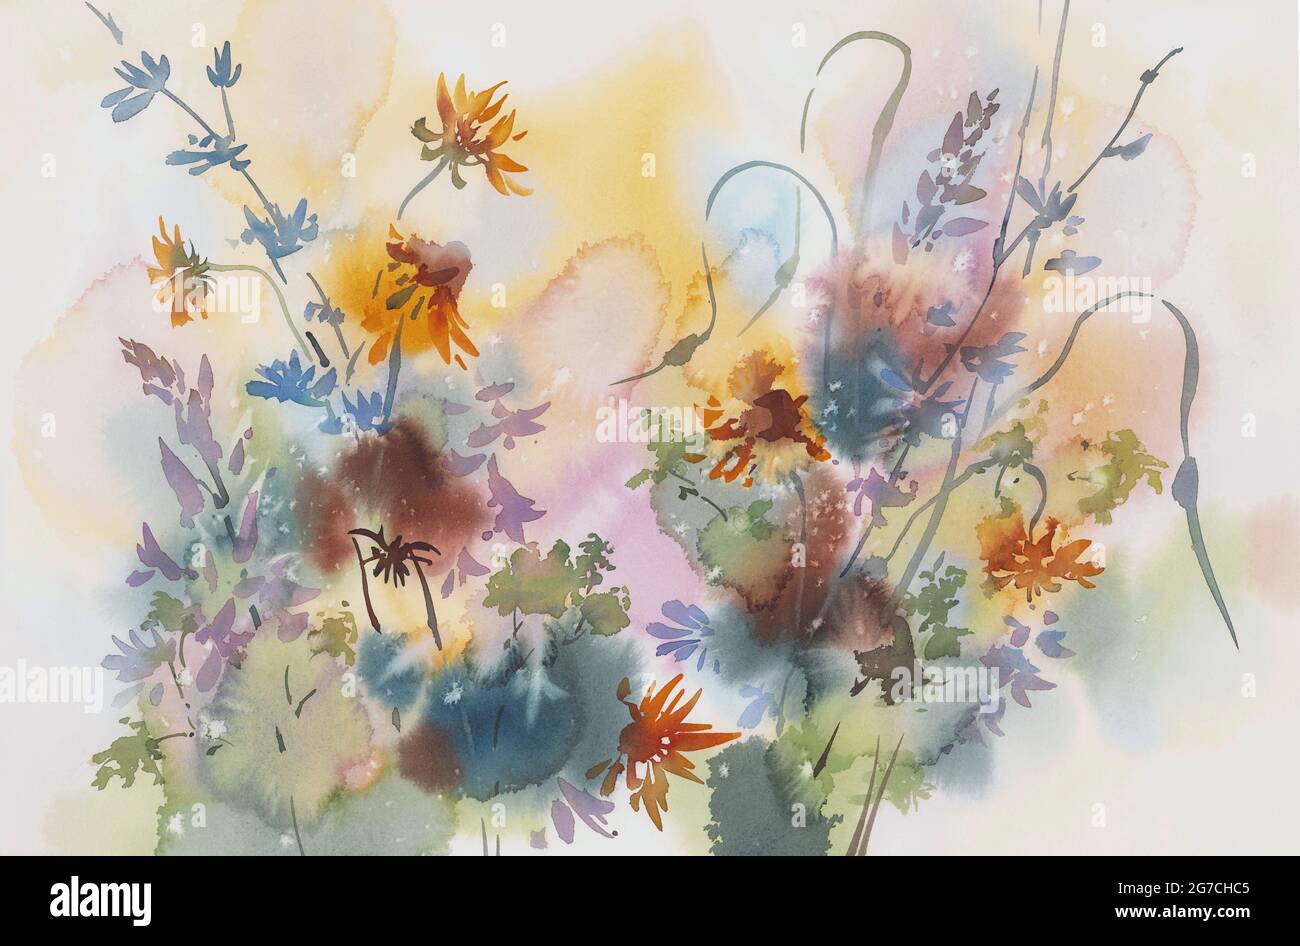 Summer Meadow Watercolor Floral Collection